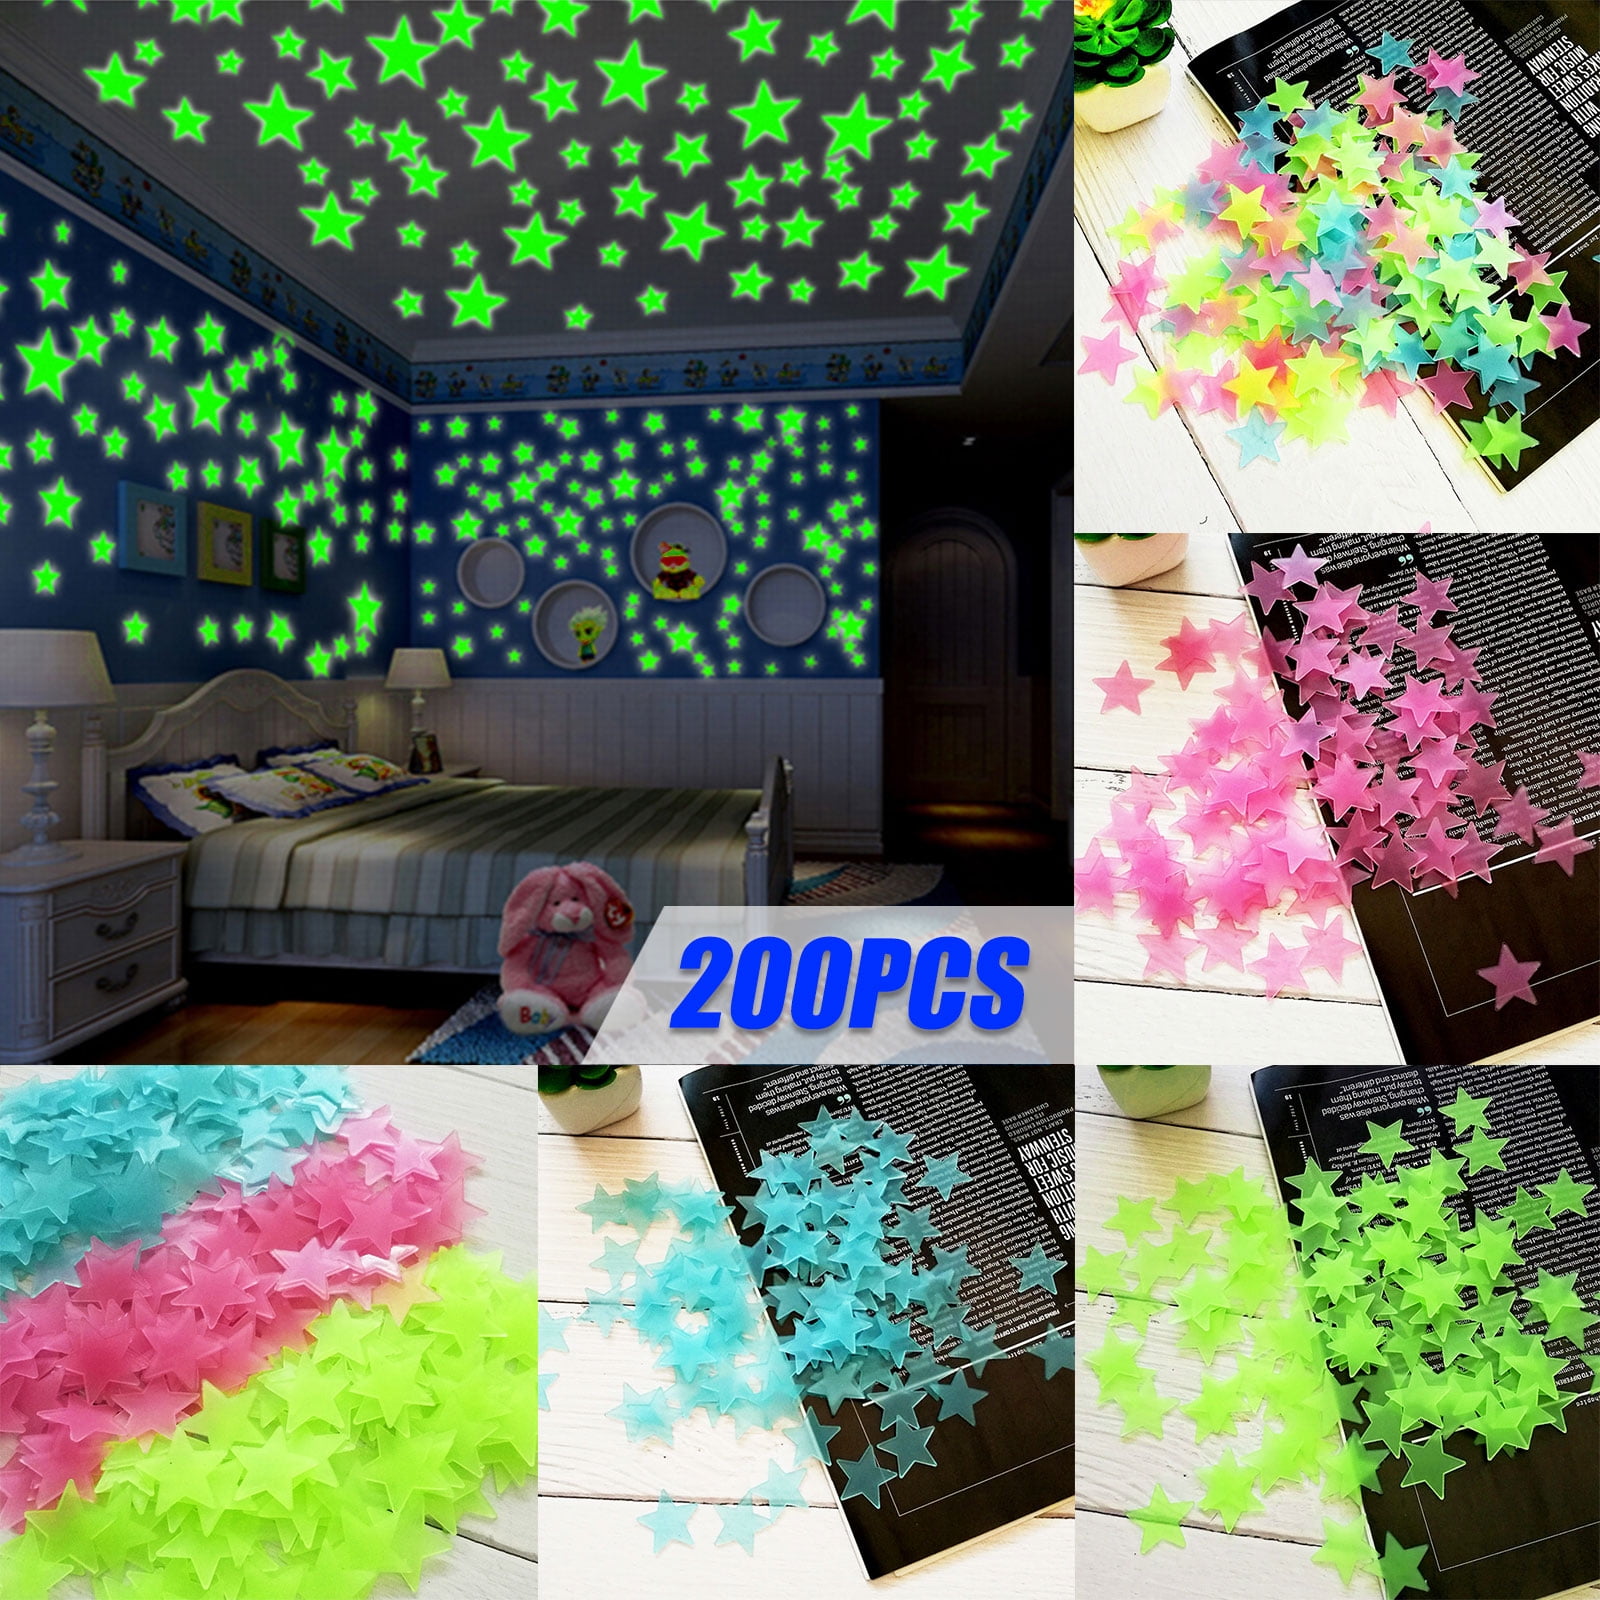 100Pcs Wall Stickers Home Room Decor Glow In The Dark Star Sticker Decals 